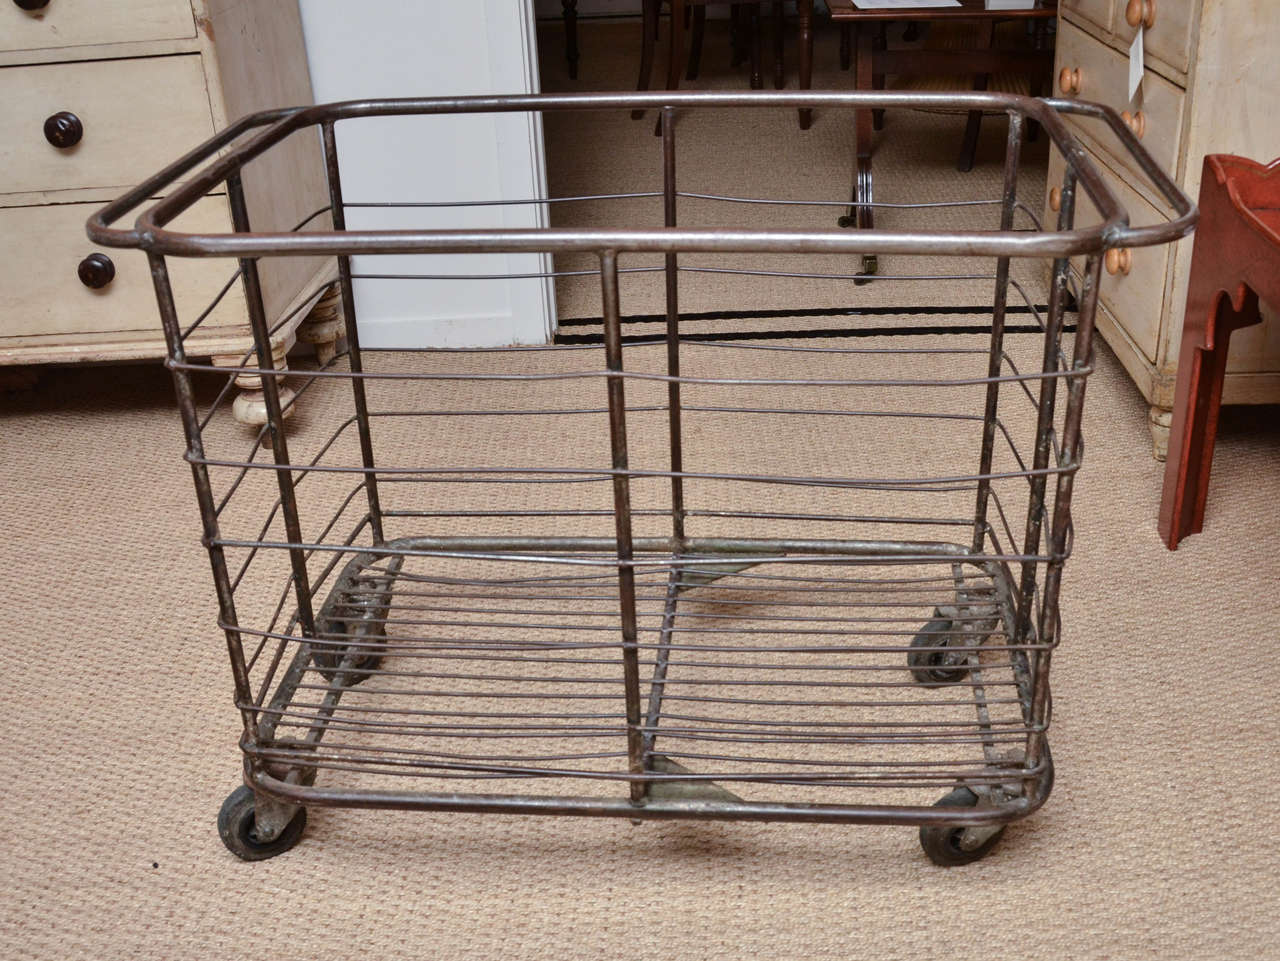 A steel baguette trolley from France would be perfect for storing fireplace logs.